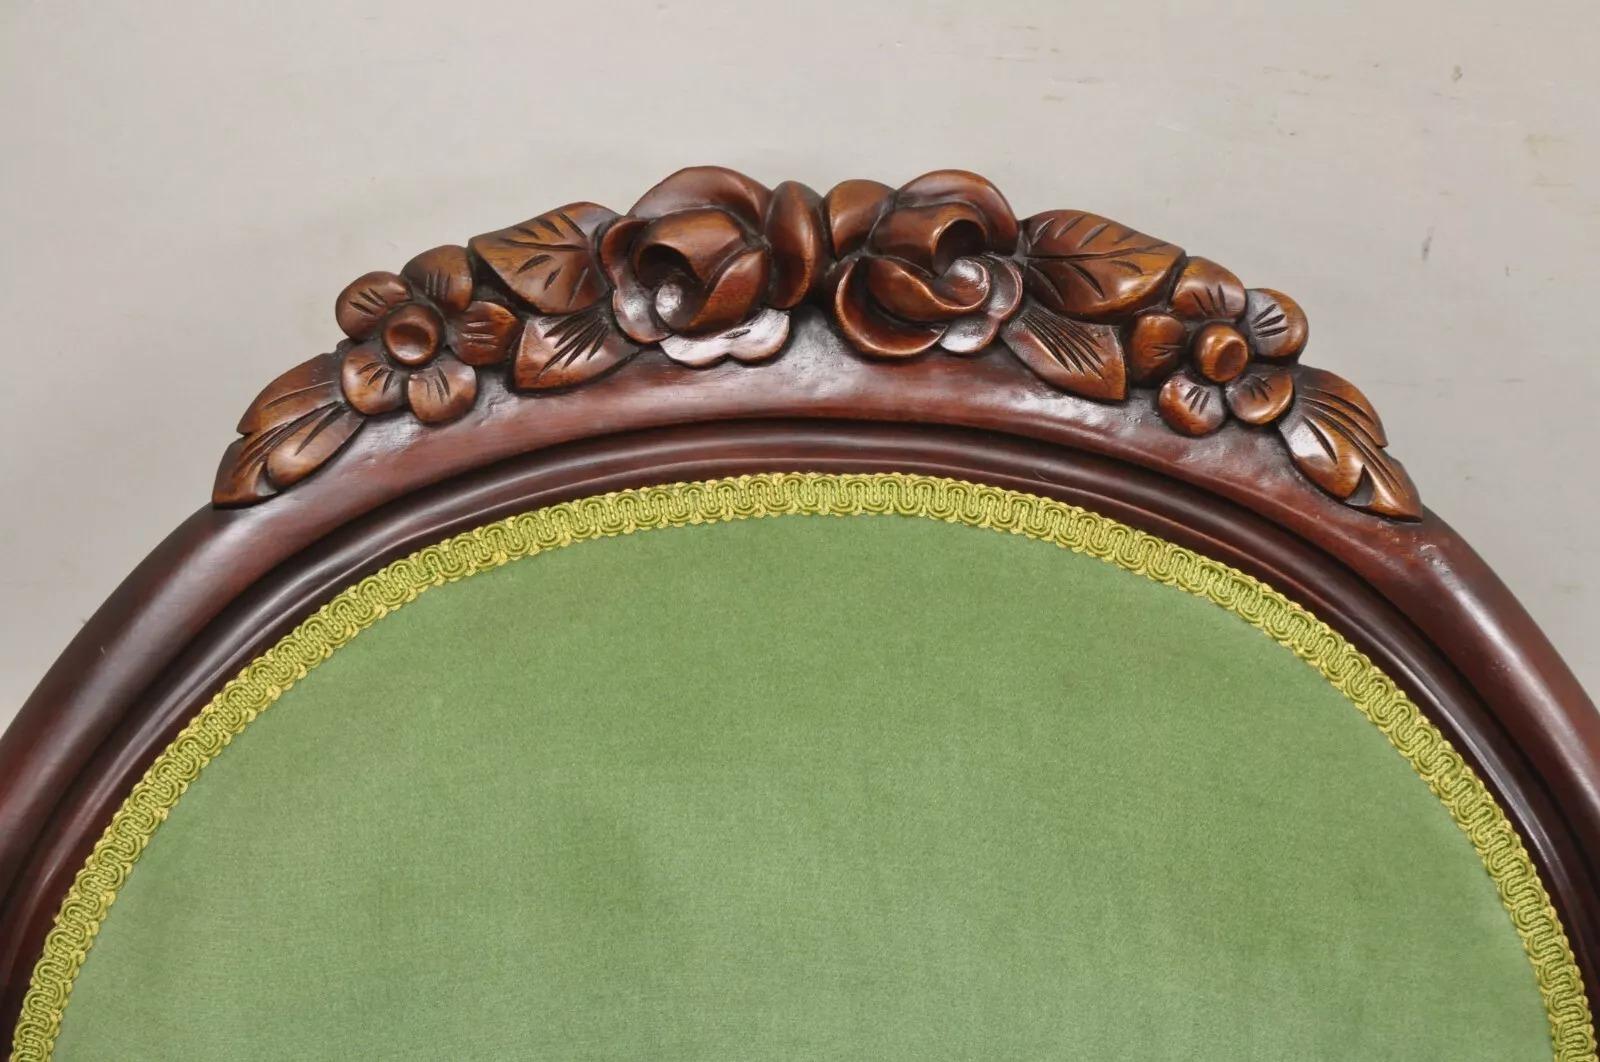 20th Century Vintage Victorian Green & Yellow His & Hers Rose Carved Parlor Chairs - a Pair For Sale